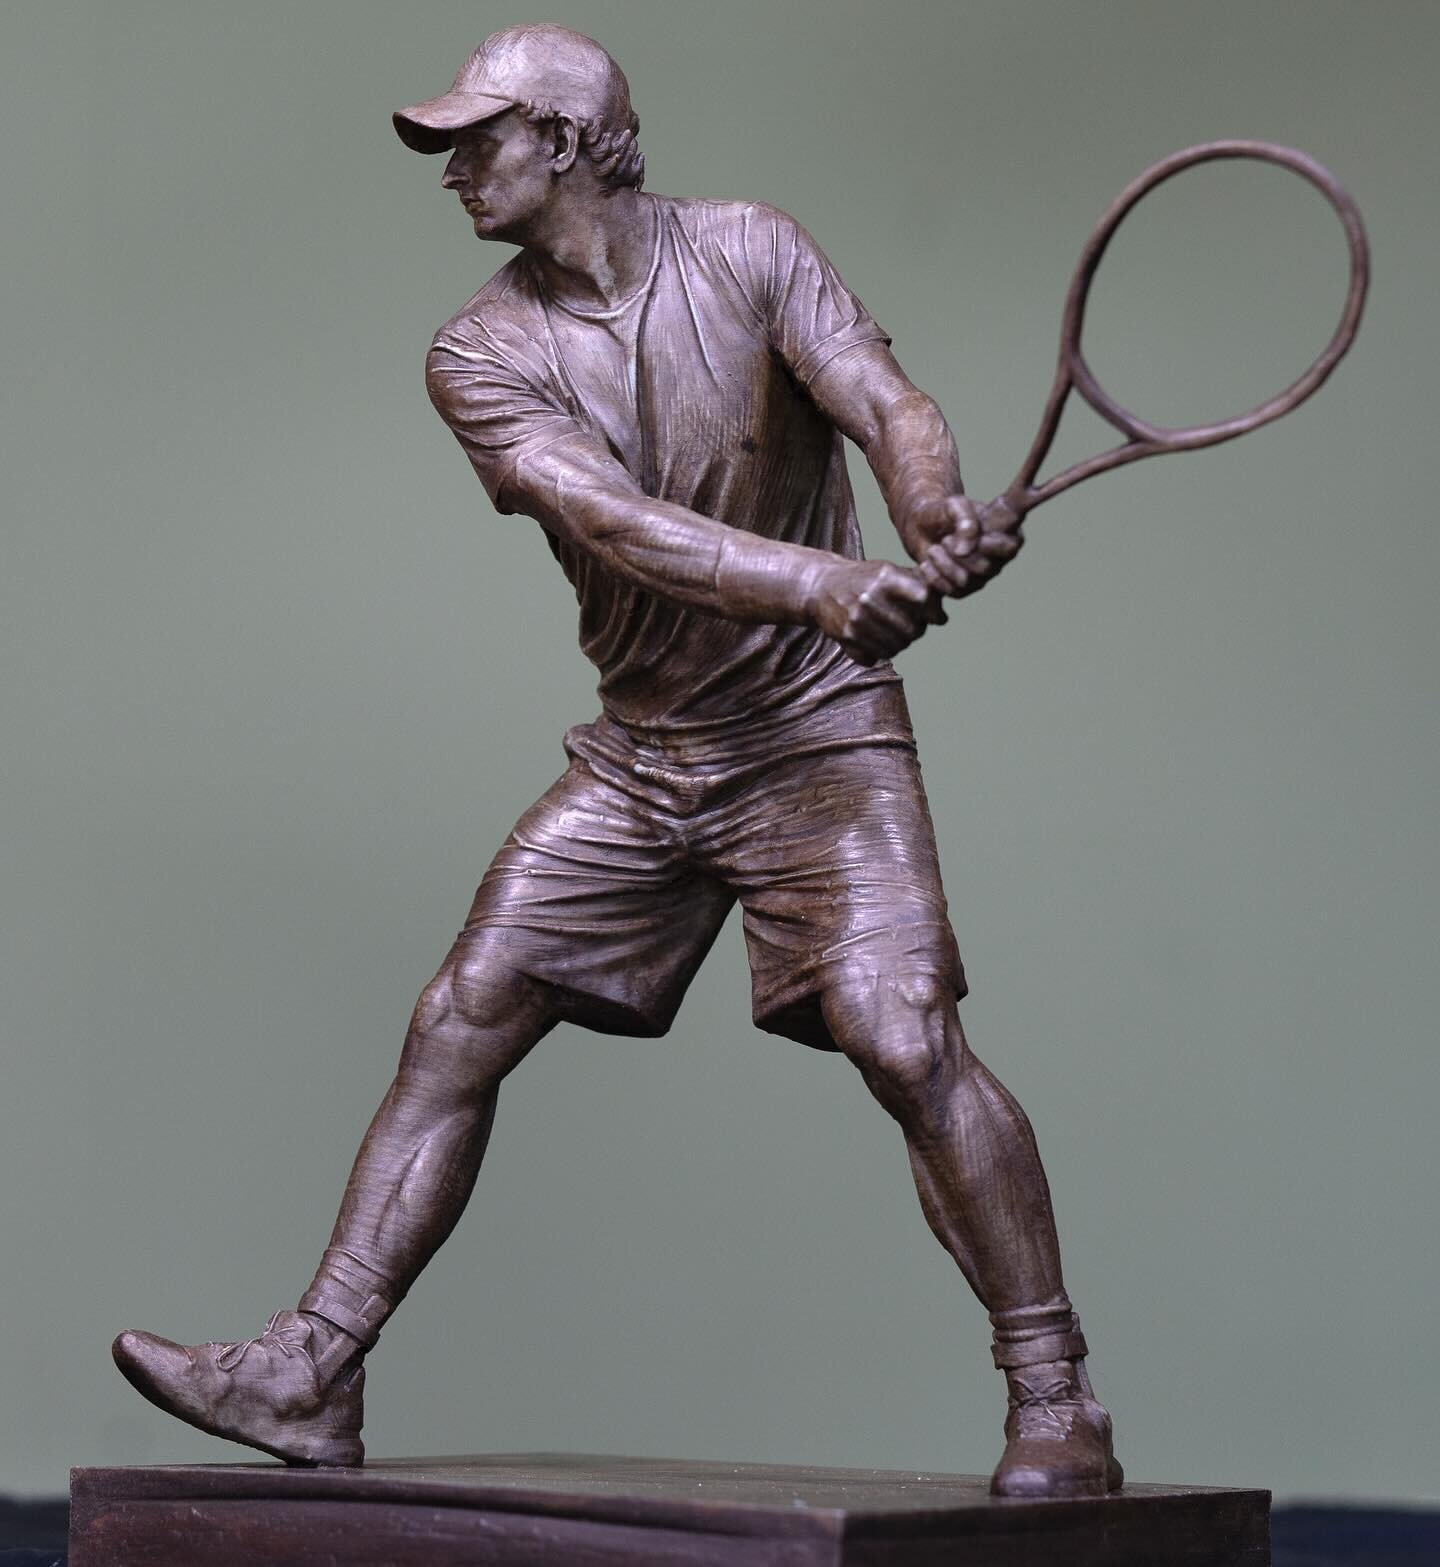 Still a lot of &ldquo;Life in the old dog yet!&rdquo; 

#wimbledon #andymurray #sculpture